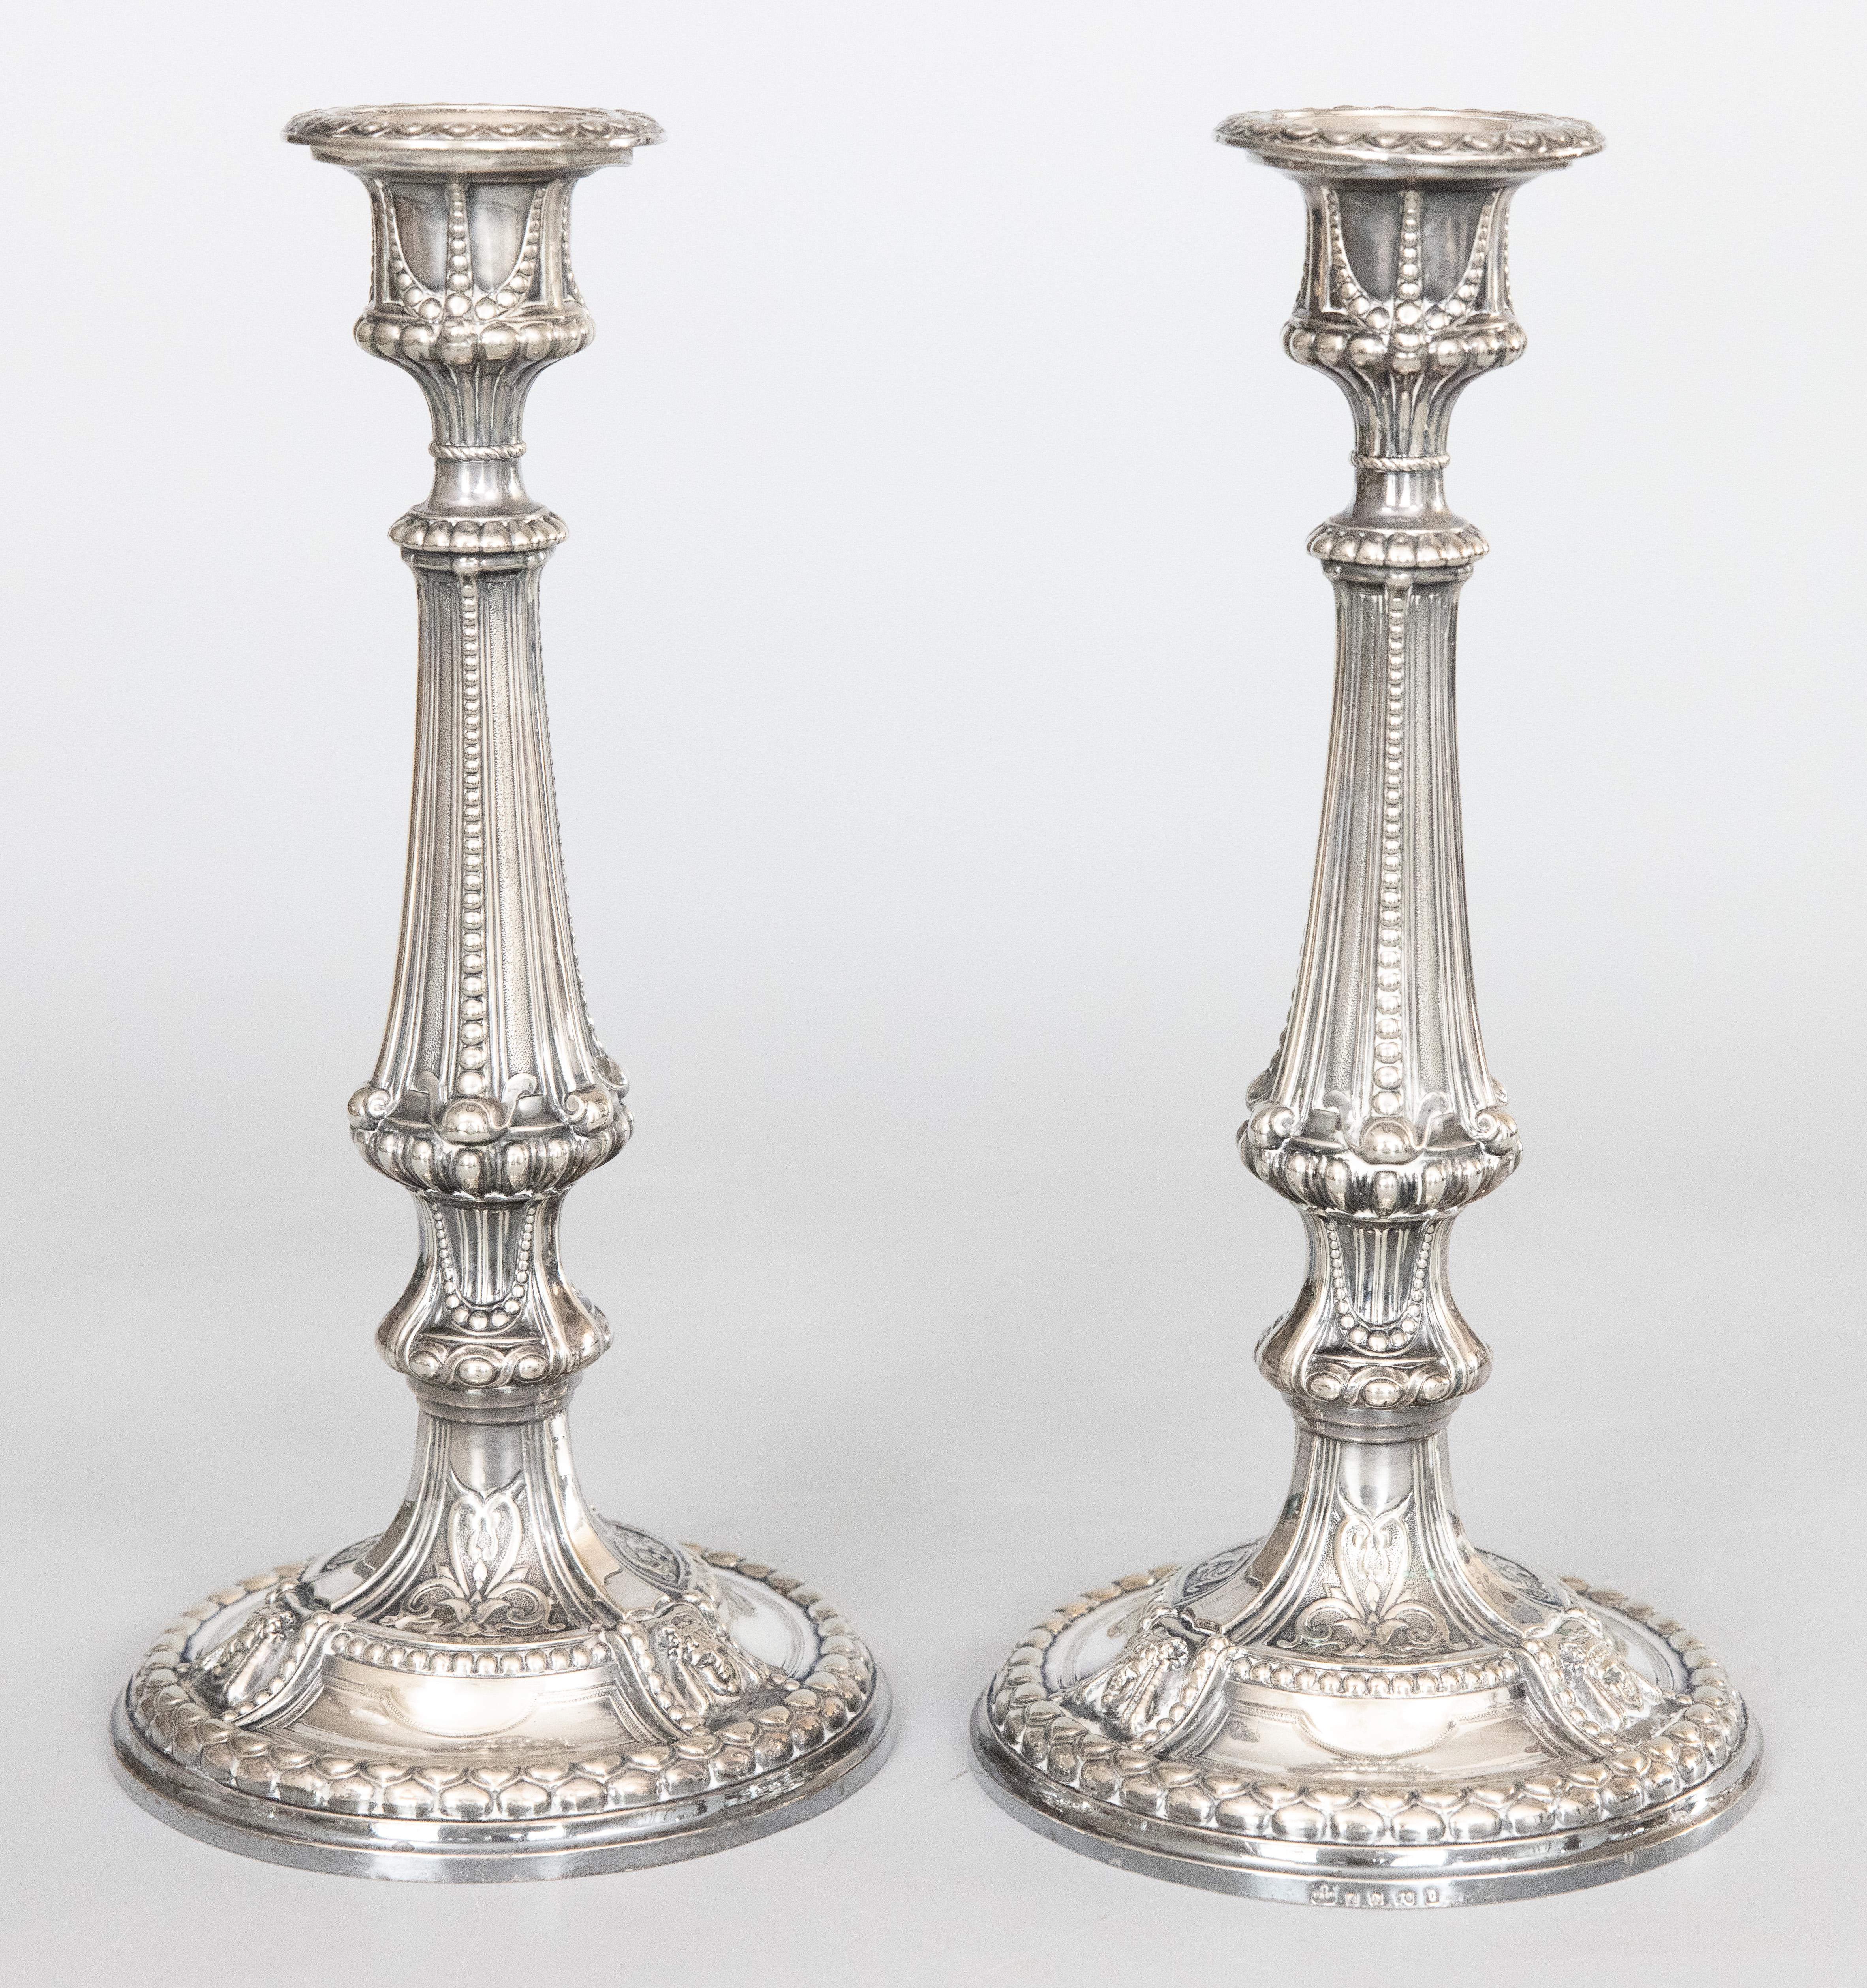 A beautiful pair of antique English silverplated candlesticks, circa 1900. Hallmarked on base. These gorgeous candle holders are well made and heavy with a beautiful Neoclassical design and beaded details.

DIMENSIONS
5.25ʺW × 5.25ʺD × 11ʺH


